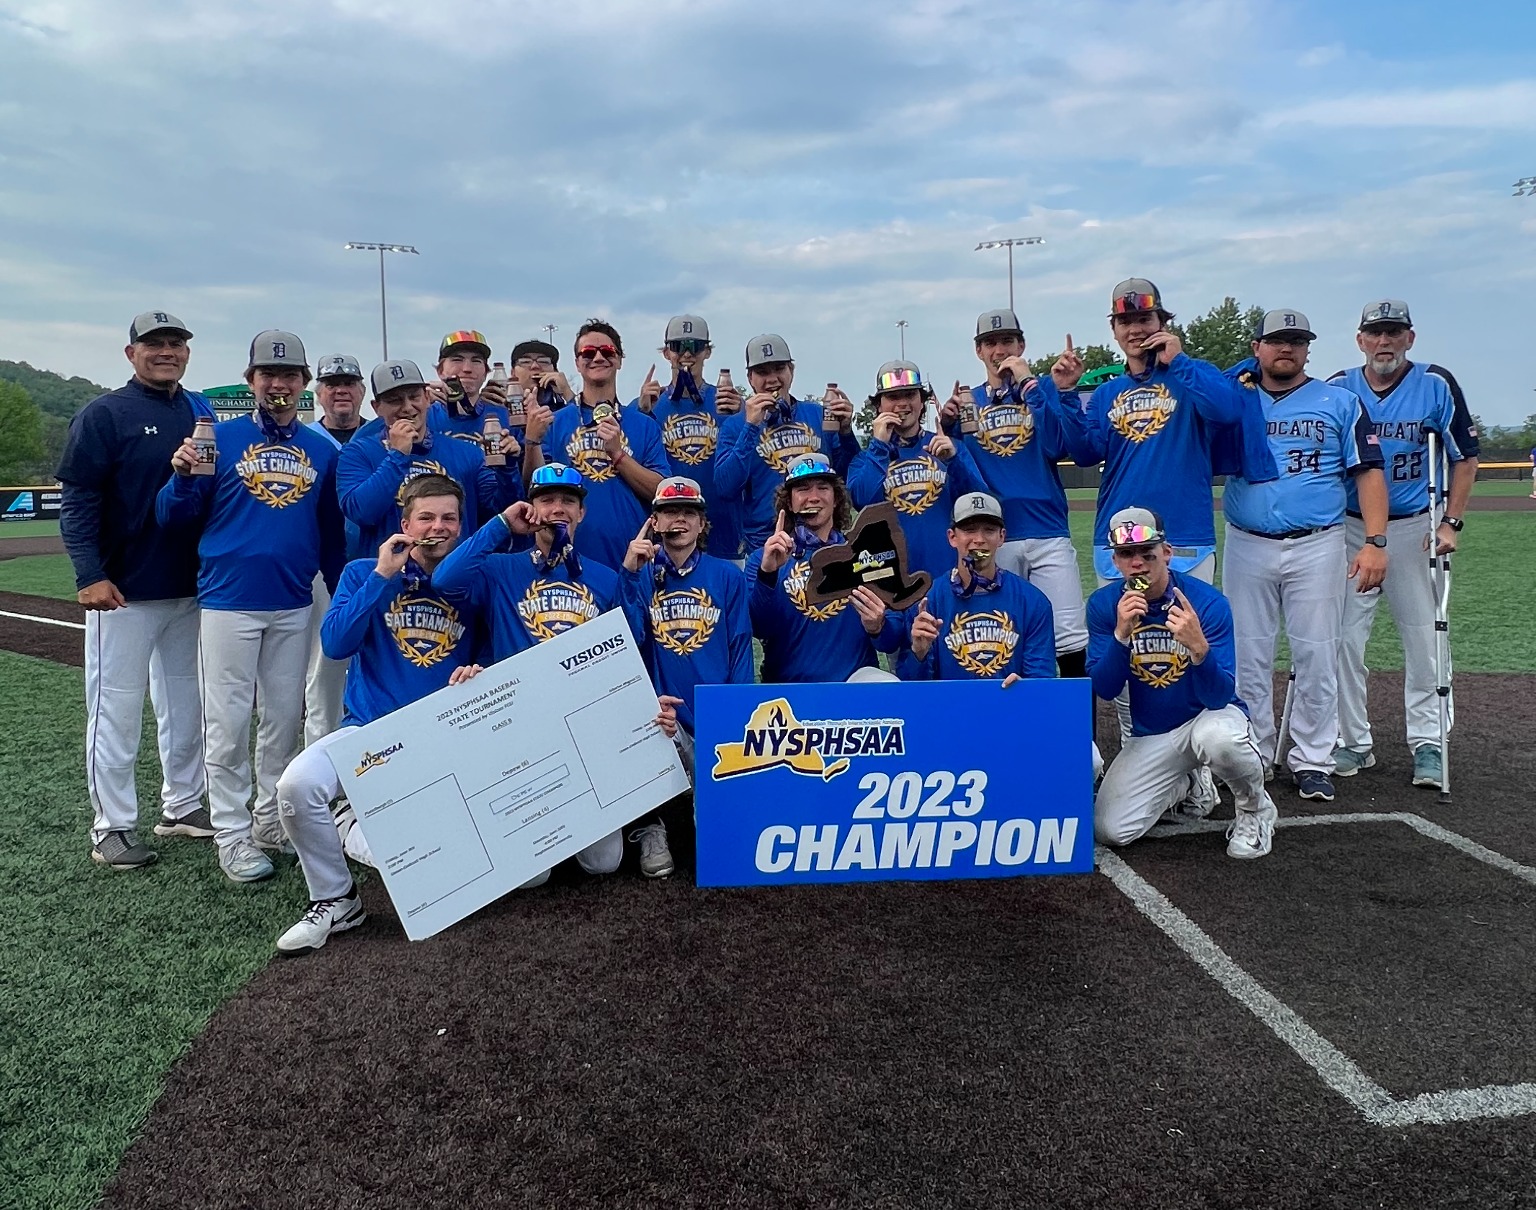 Baseball team pose with state championship sign